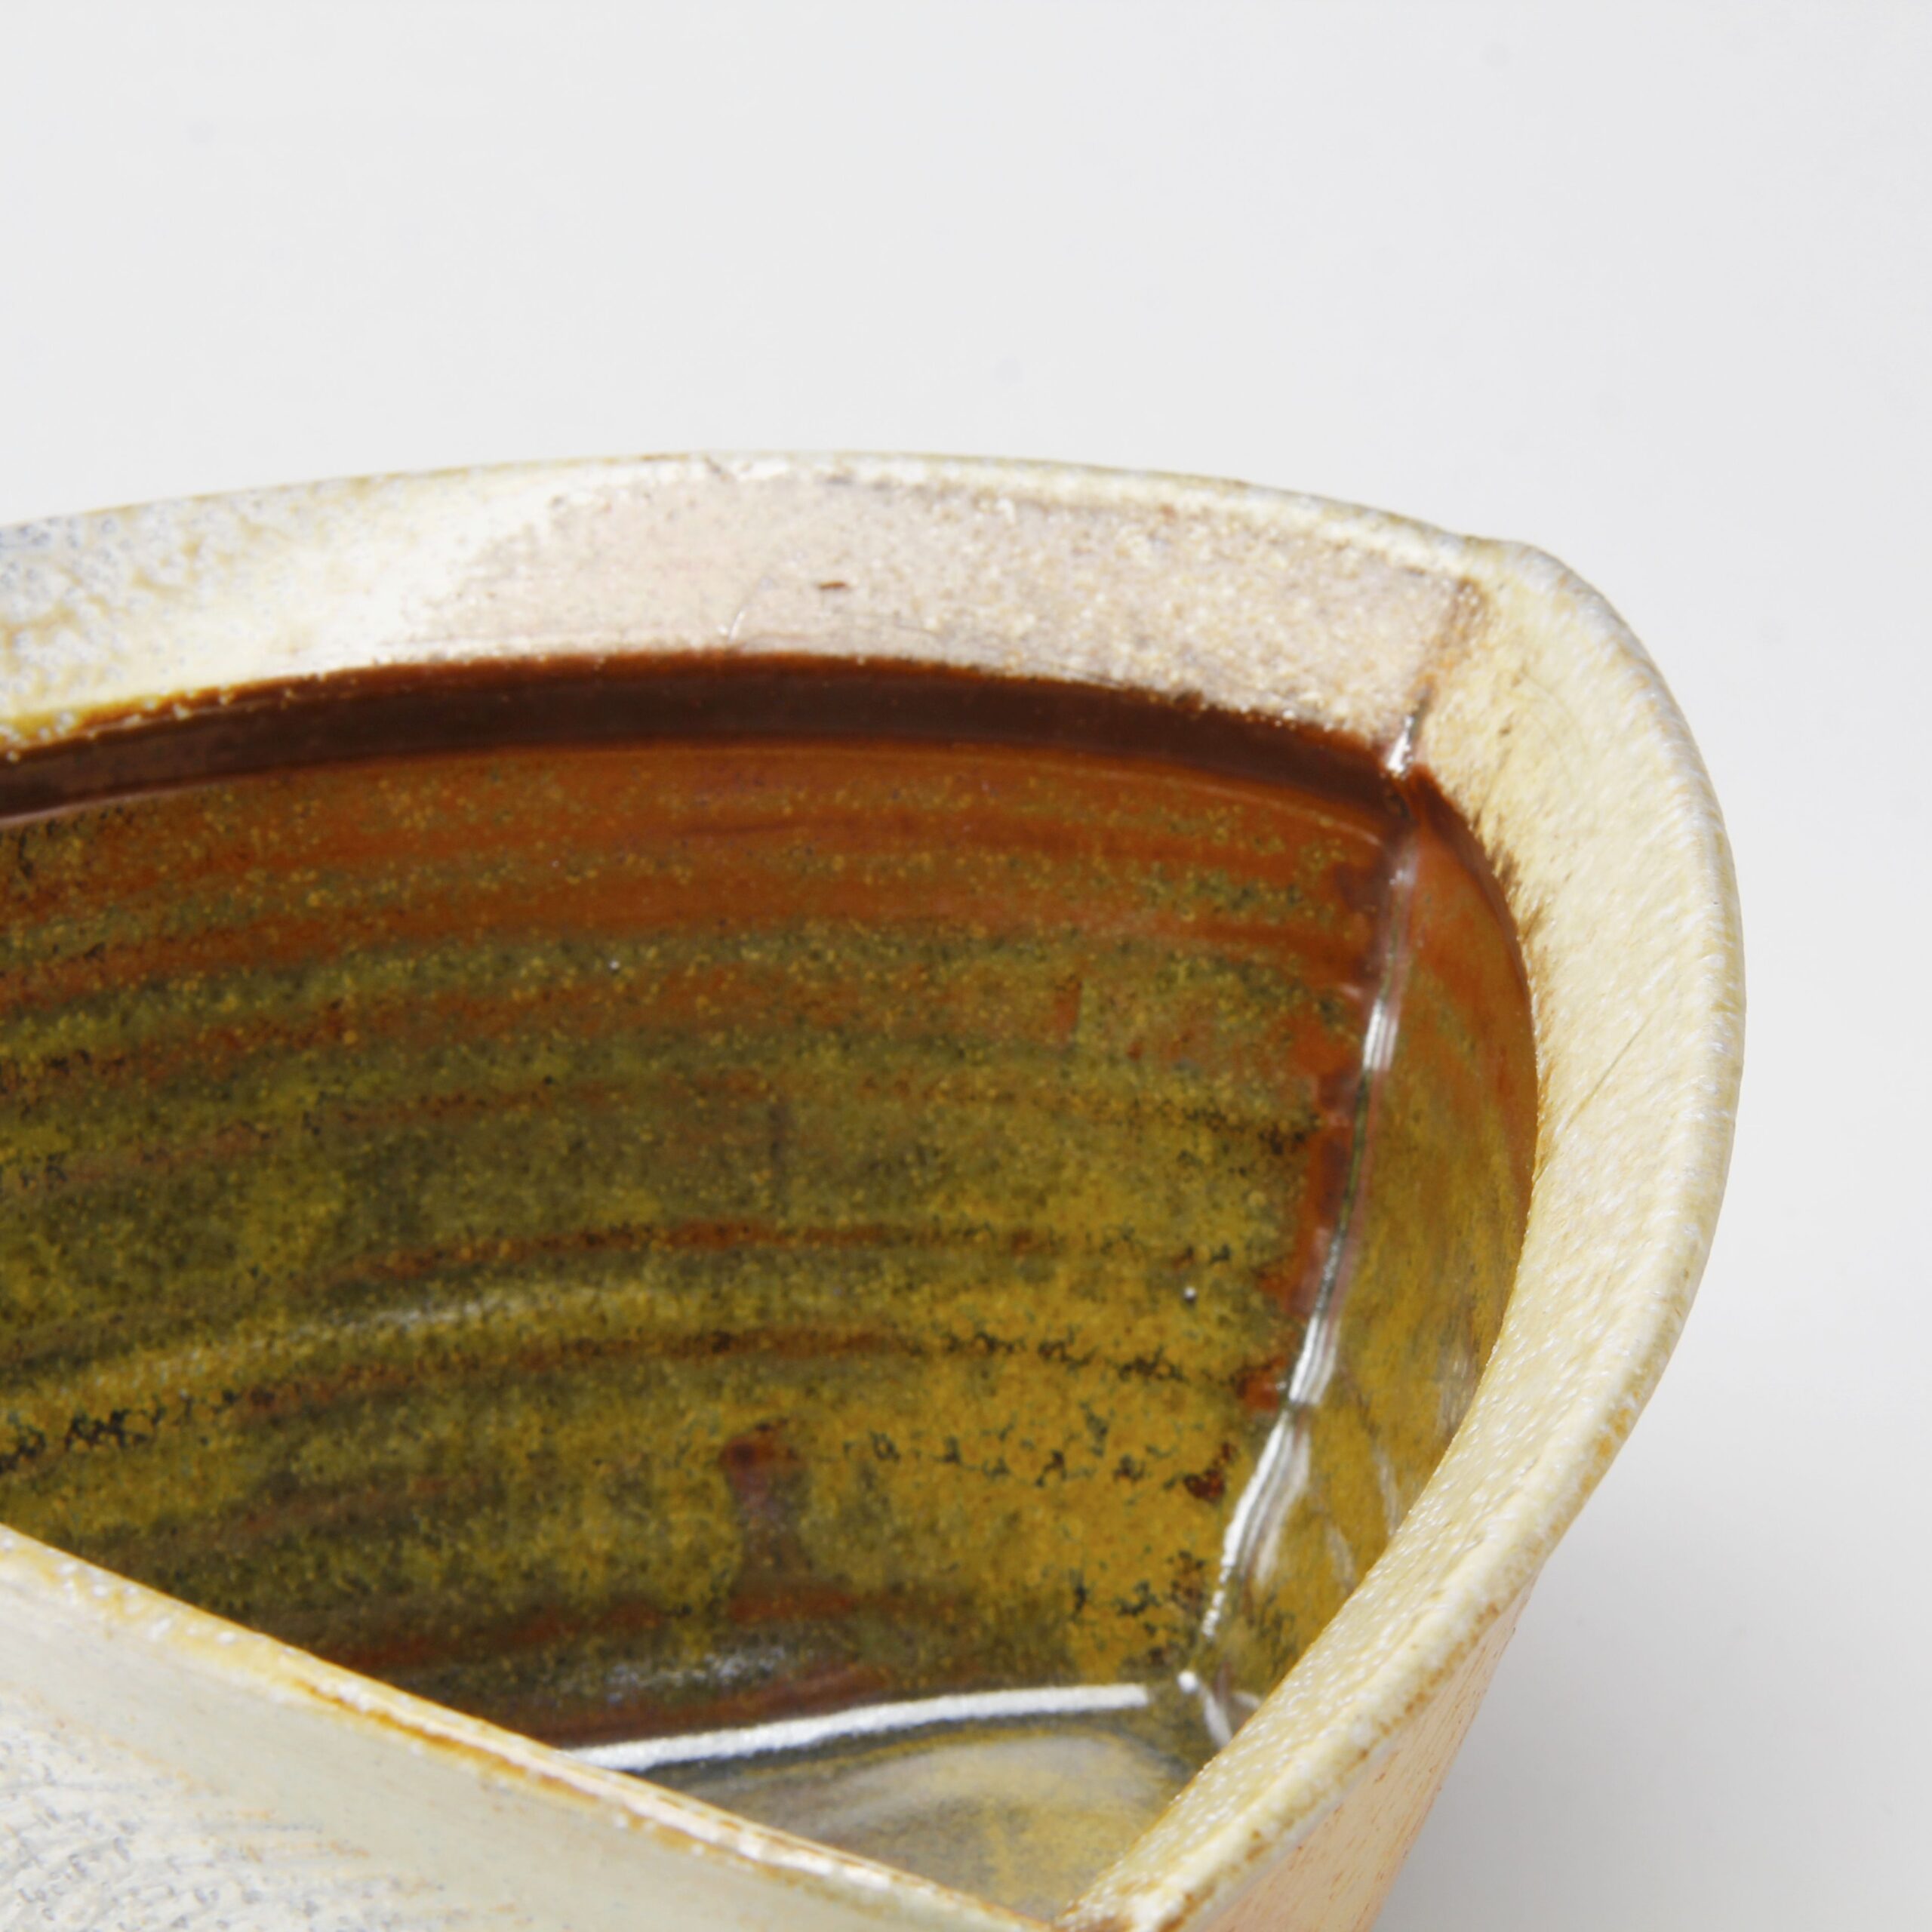 Bruce Cochrane: Triangle Bowl Product Image 1 of 4